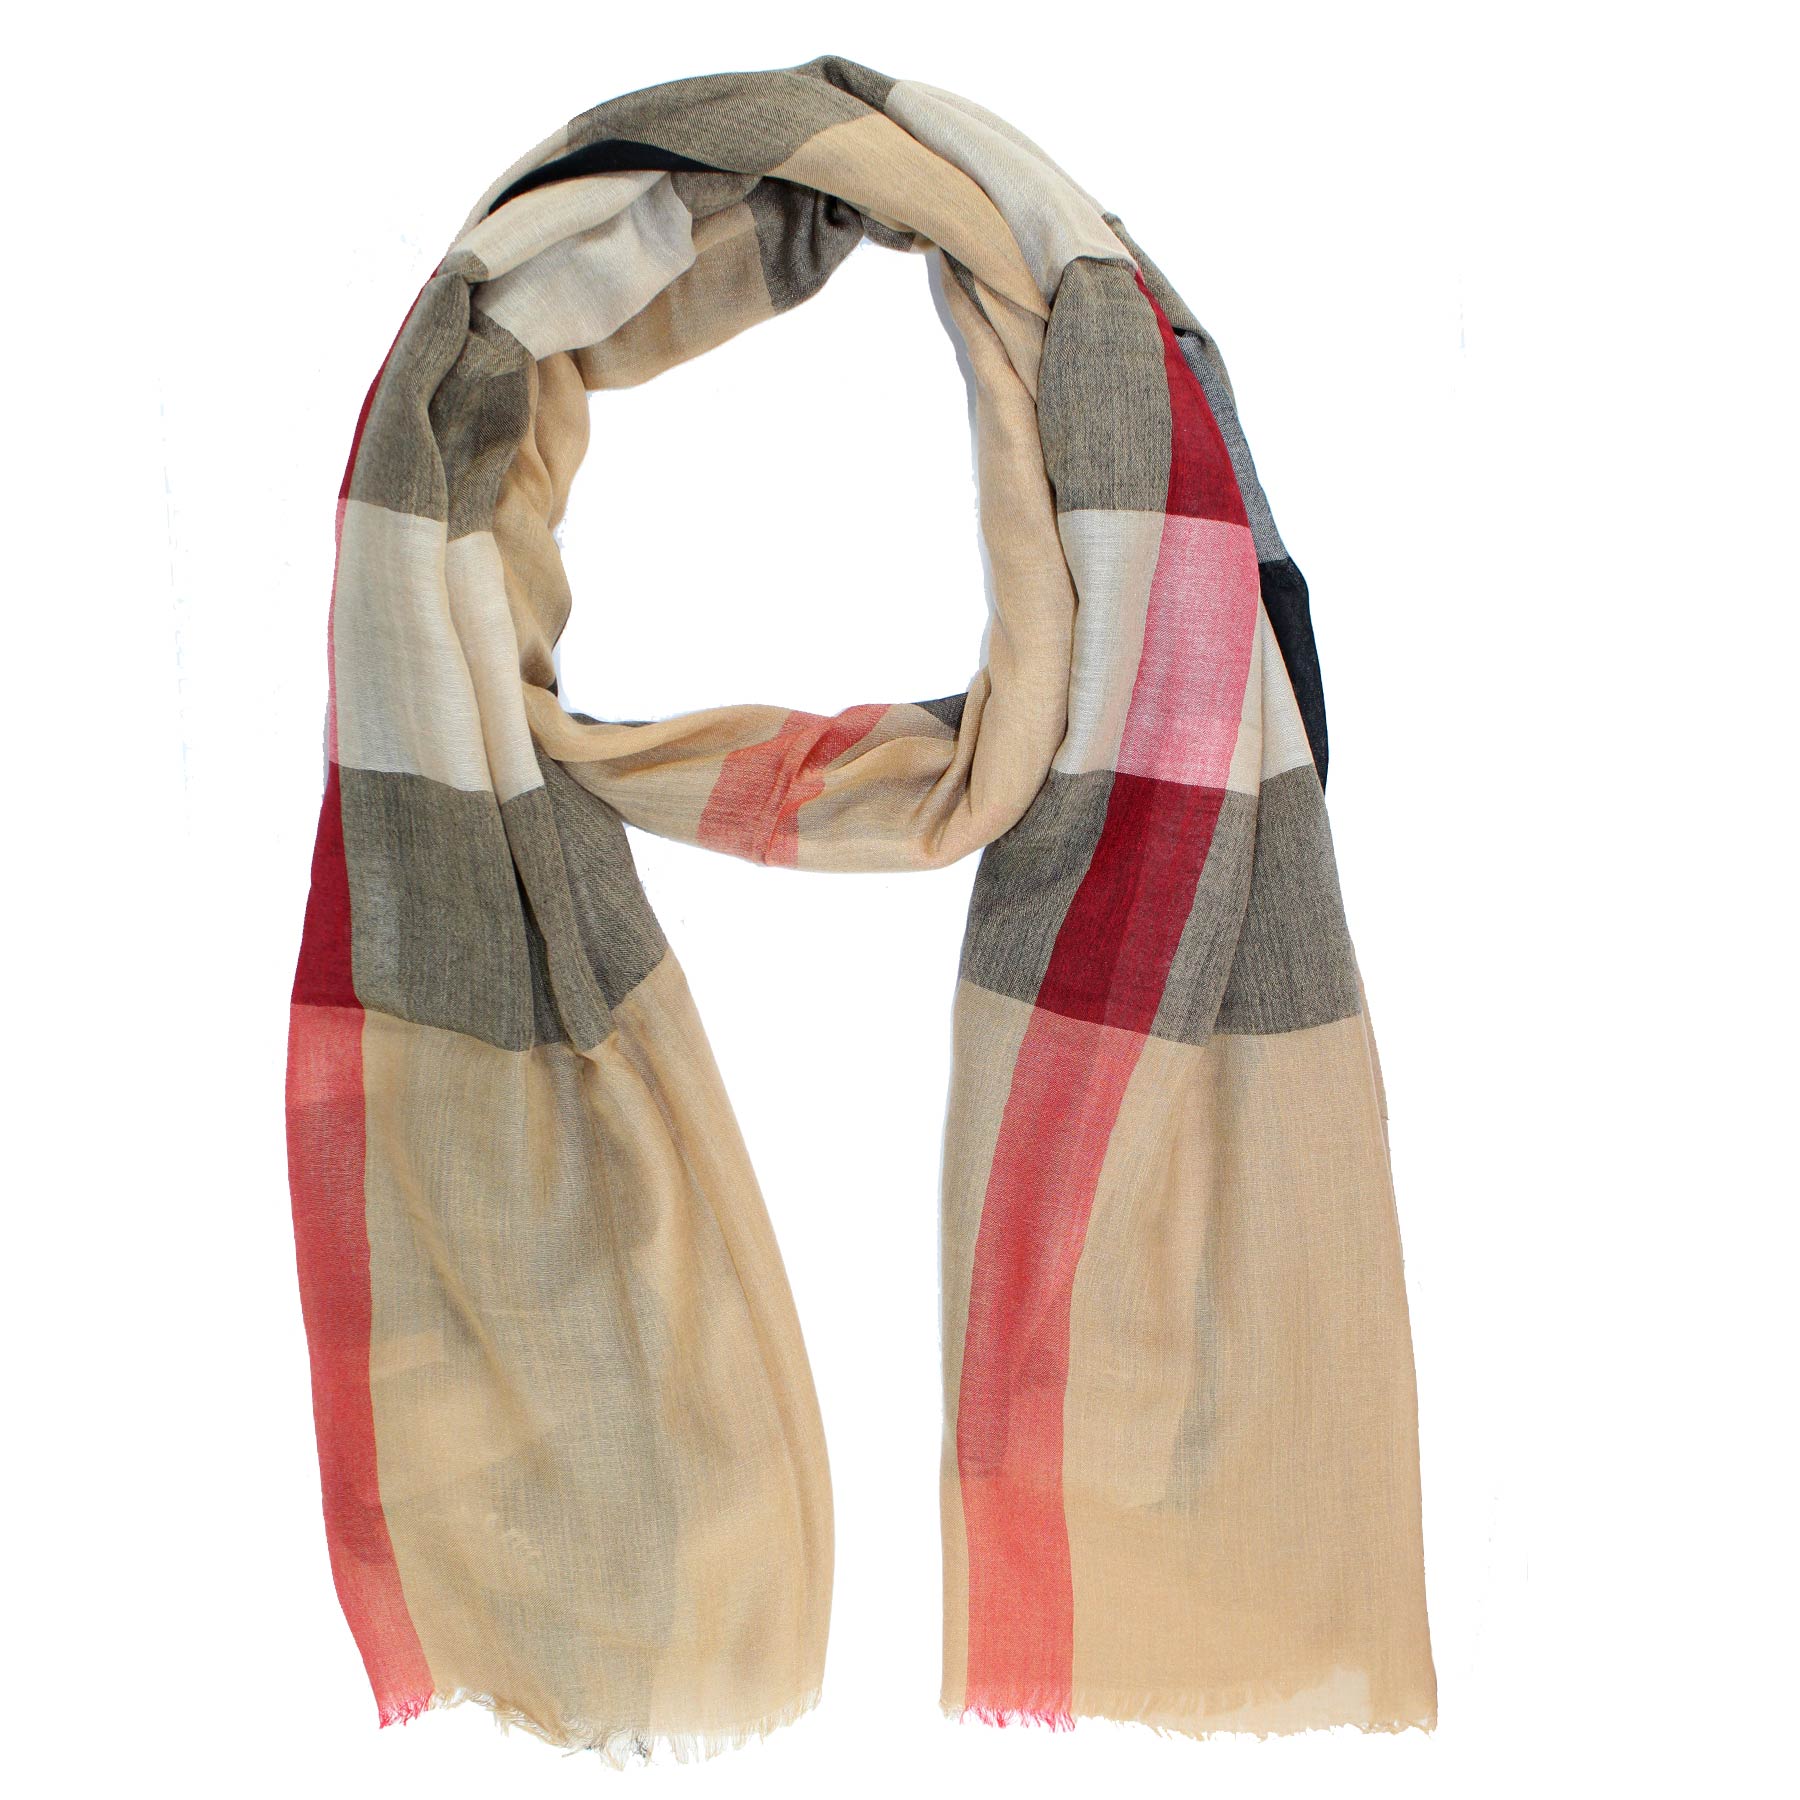 HOW TO SPOT A REAL BURBERRY SCARF